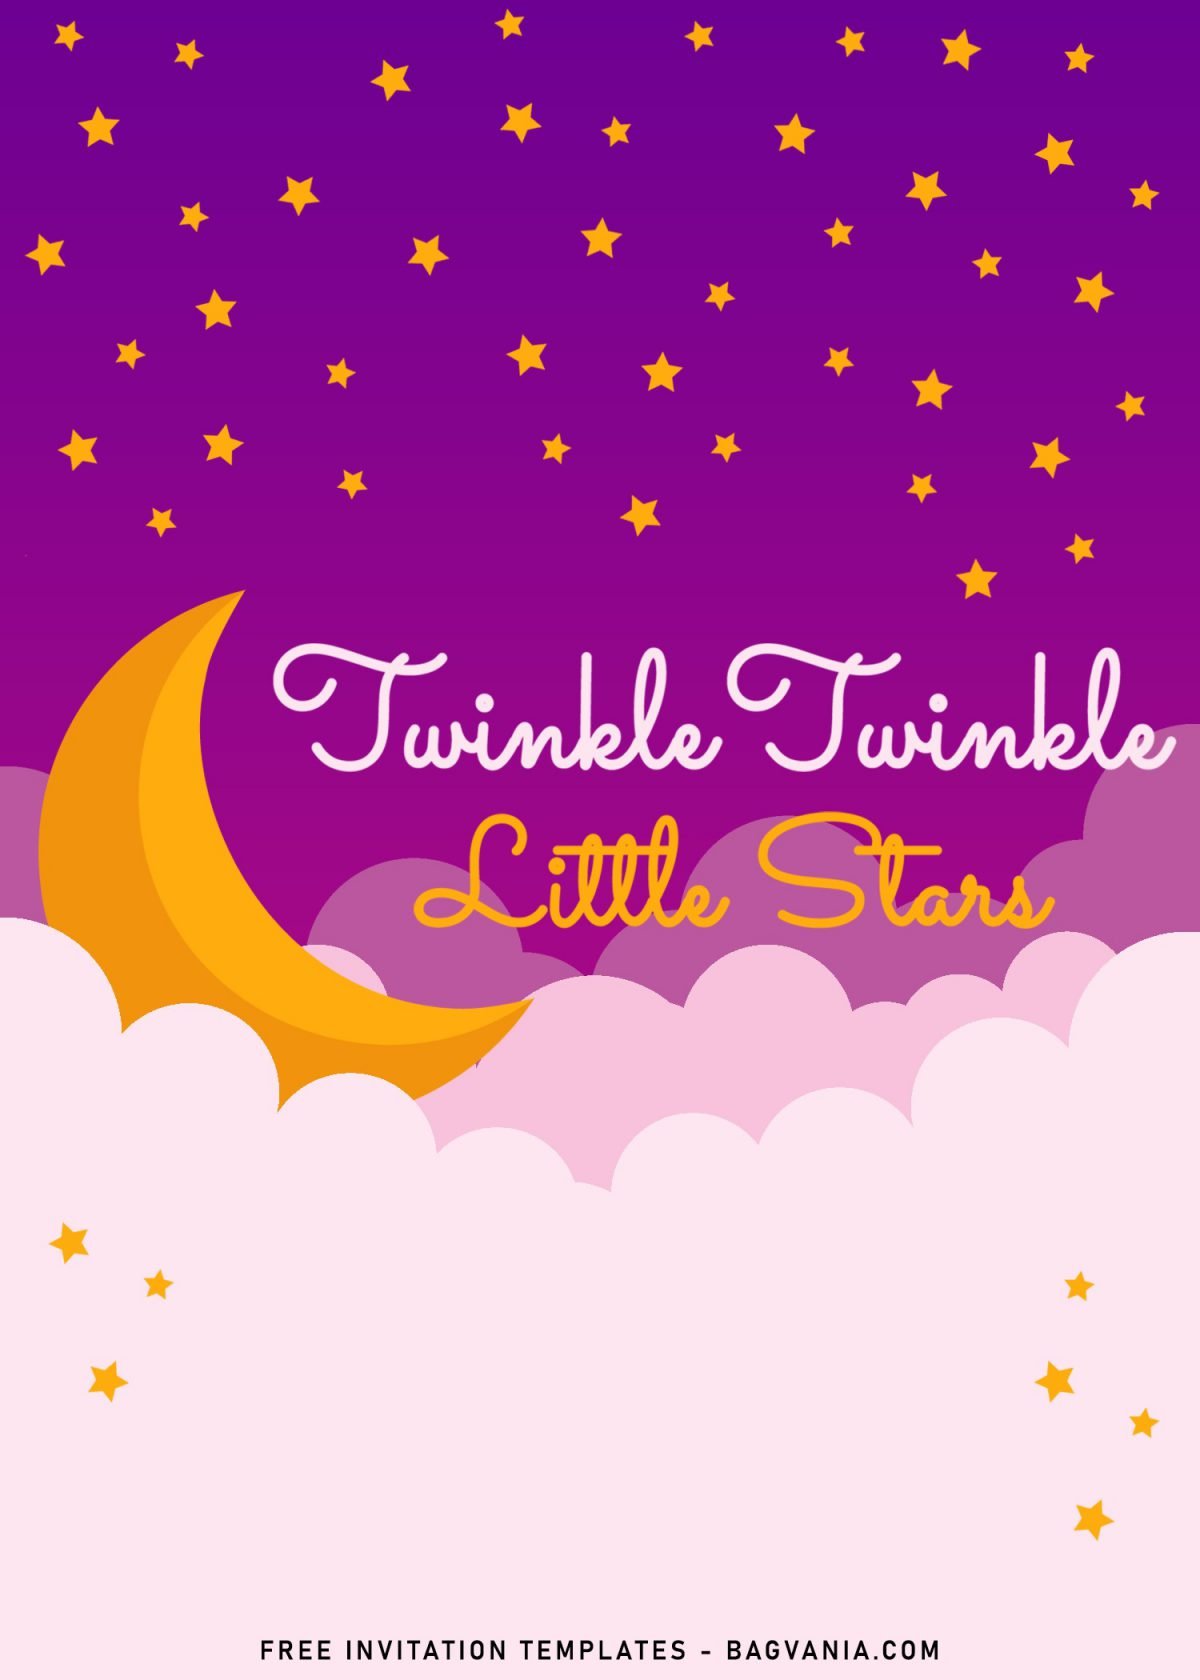 10+ Twinkle Twinkle Little Star Birthday Invitation Templates and has thousands stars